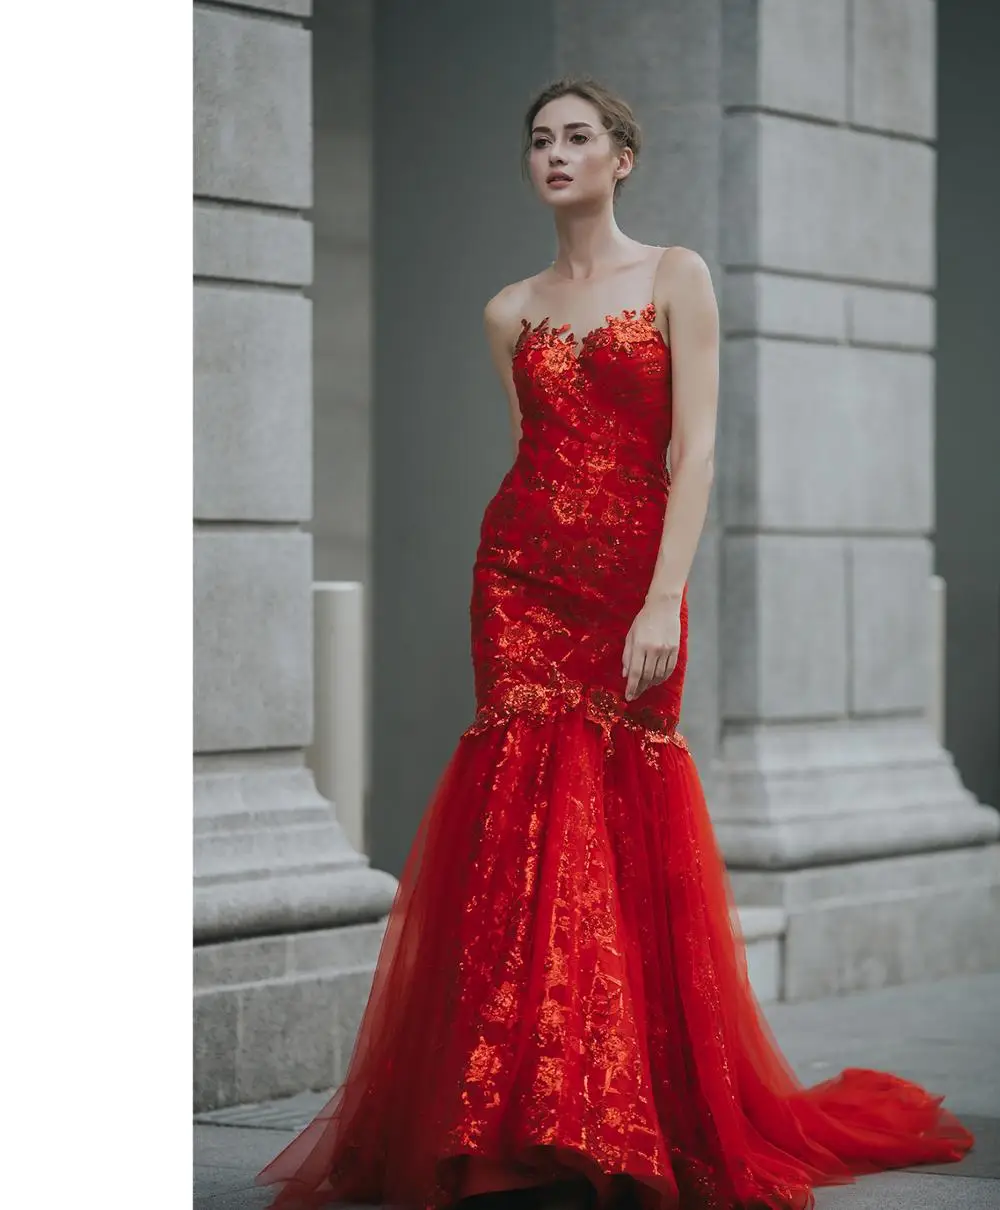 red couture gowns